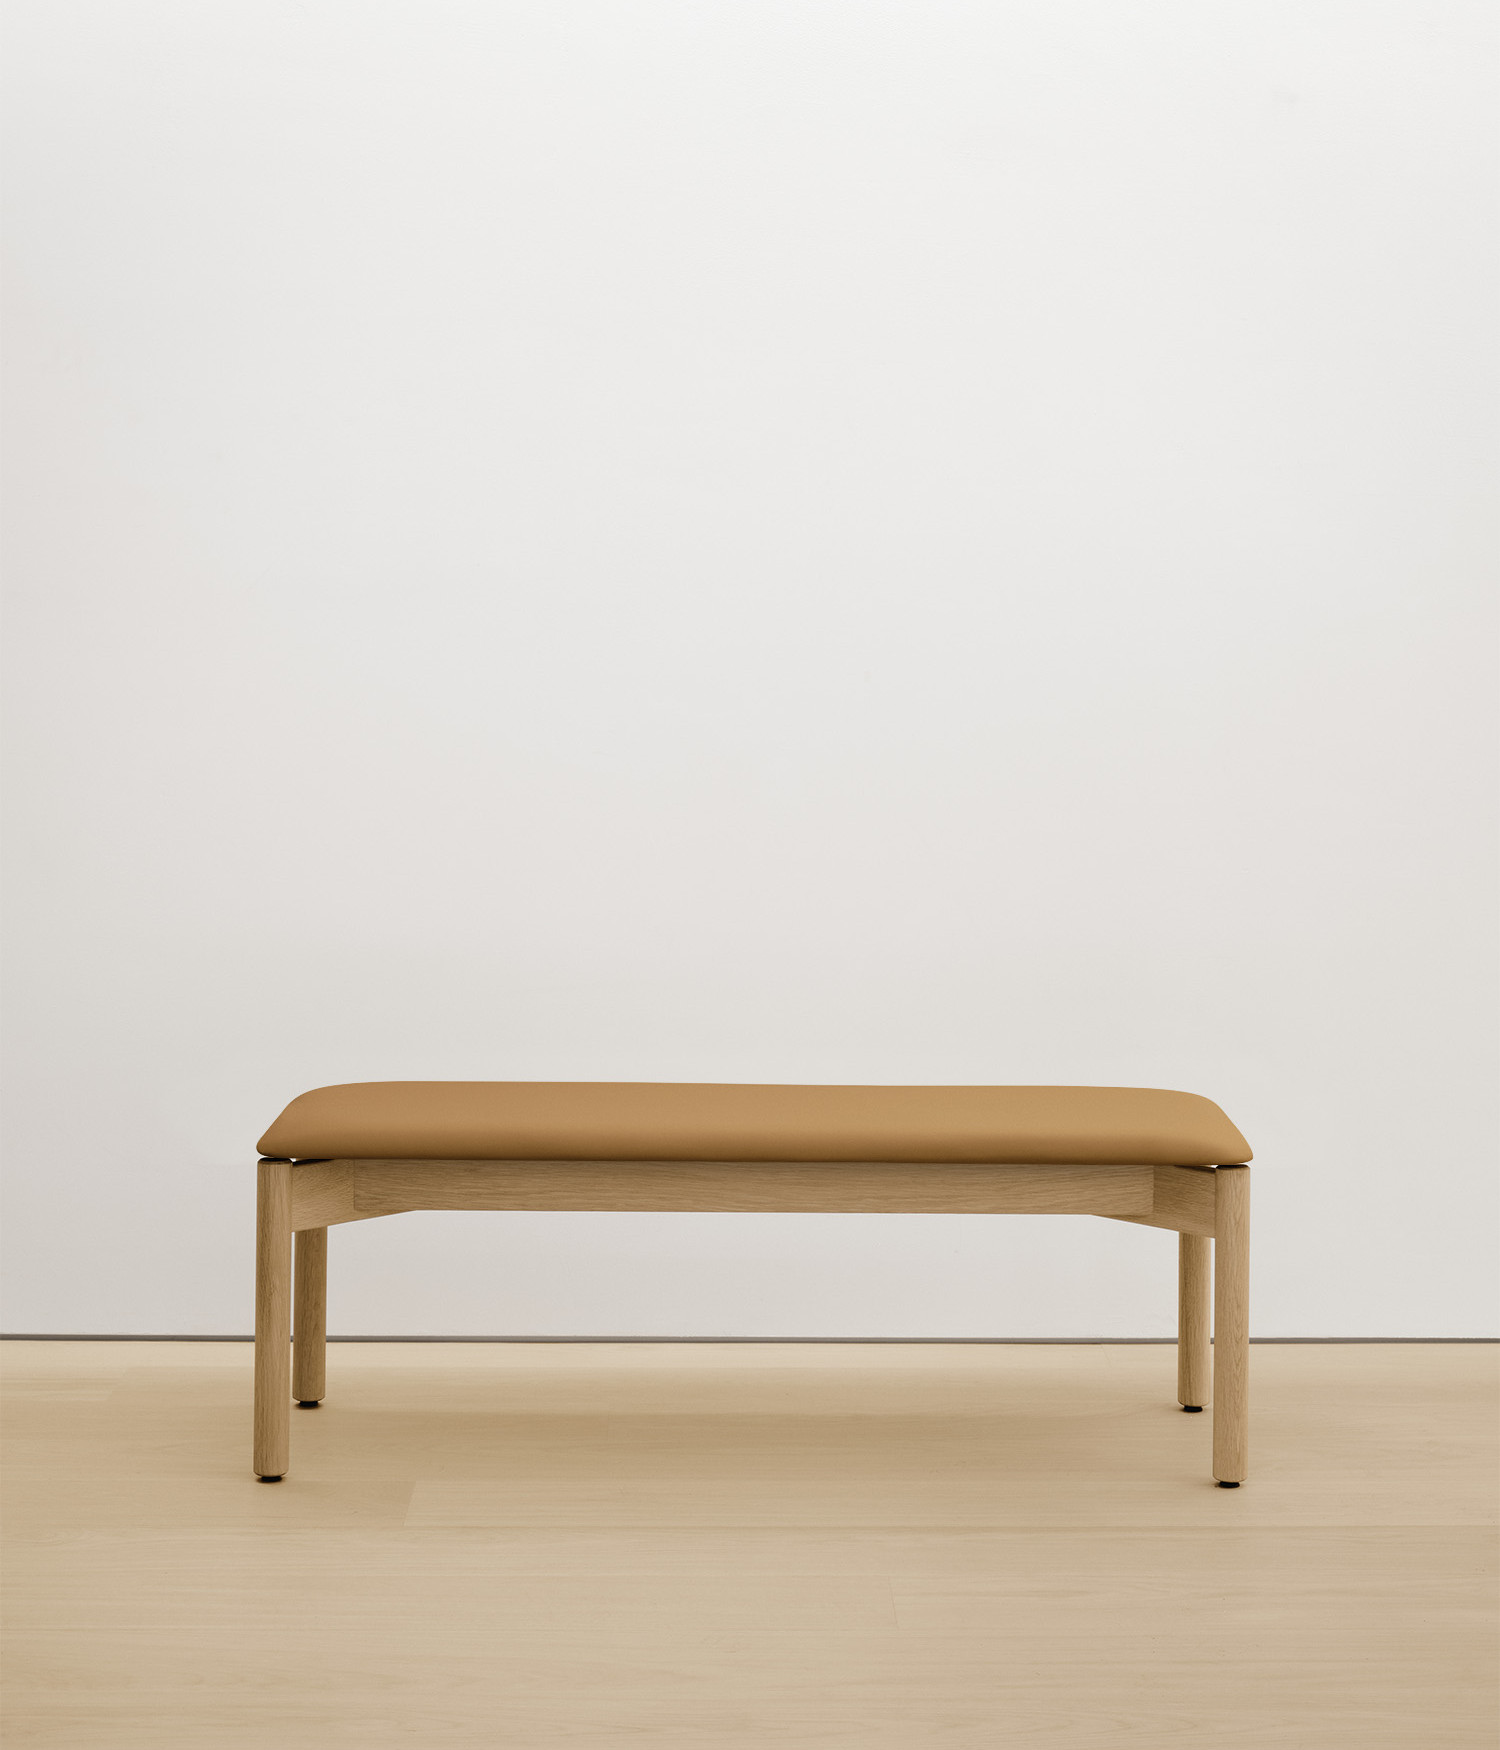 white-oak bench with tan upholstered seat